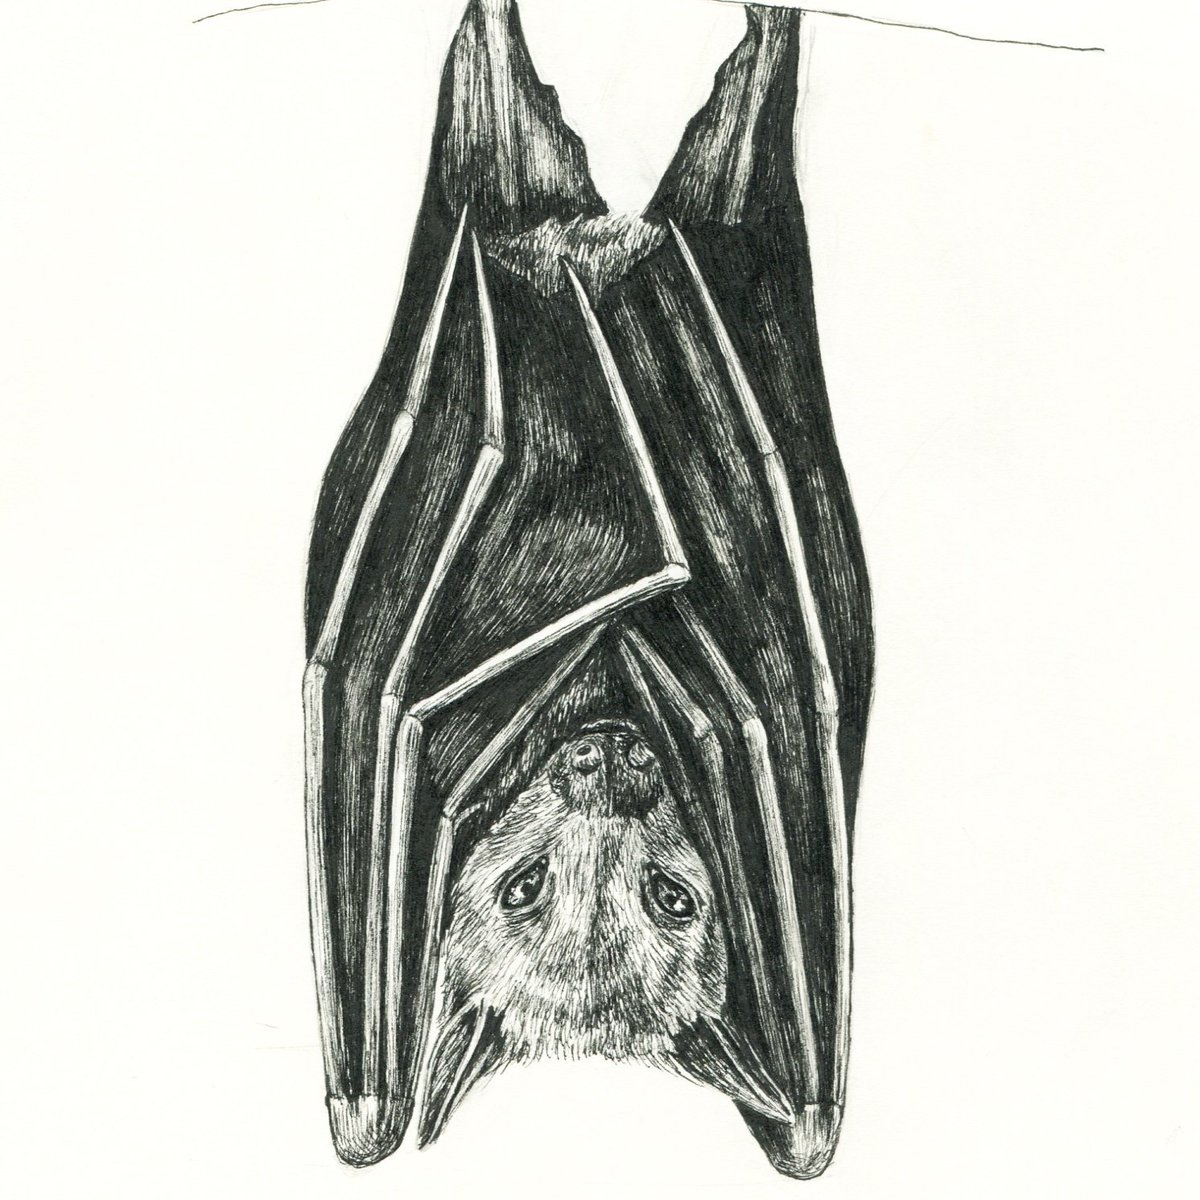 Ink October #1 'Skin' = bat wings
Following the #sciartink #sciartnow prompt this year! A lesser short nosed fruit bat!
 #bats #batillustration #sciart #illustration #scientificillustration  #scientificillustrator #inkoctober #naturalhistoryillustration #inkoctober2019